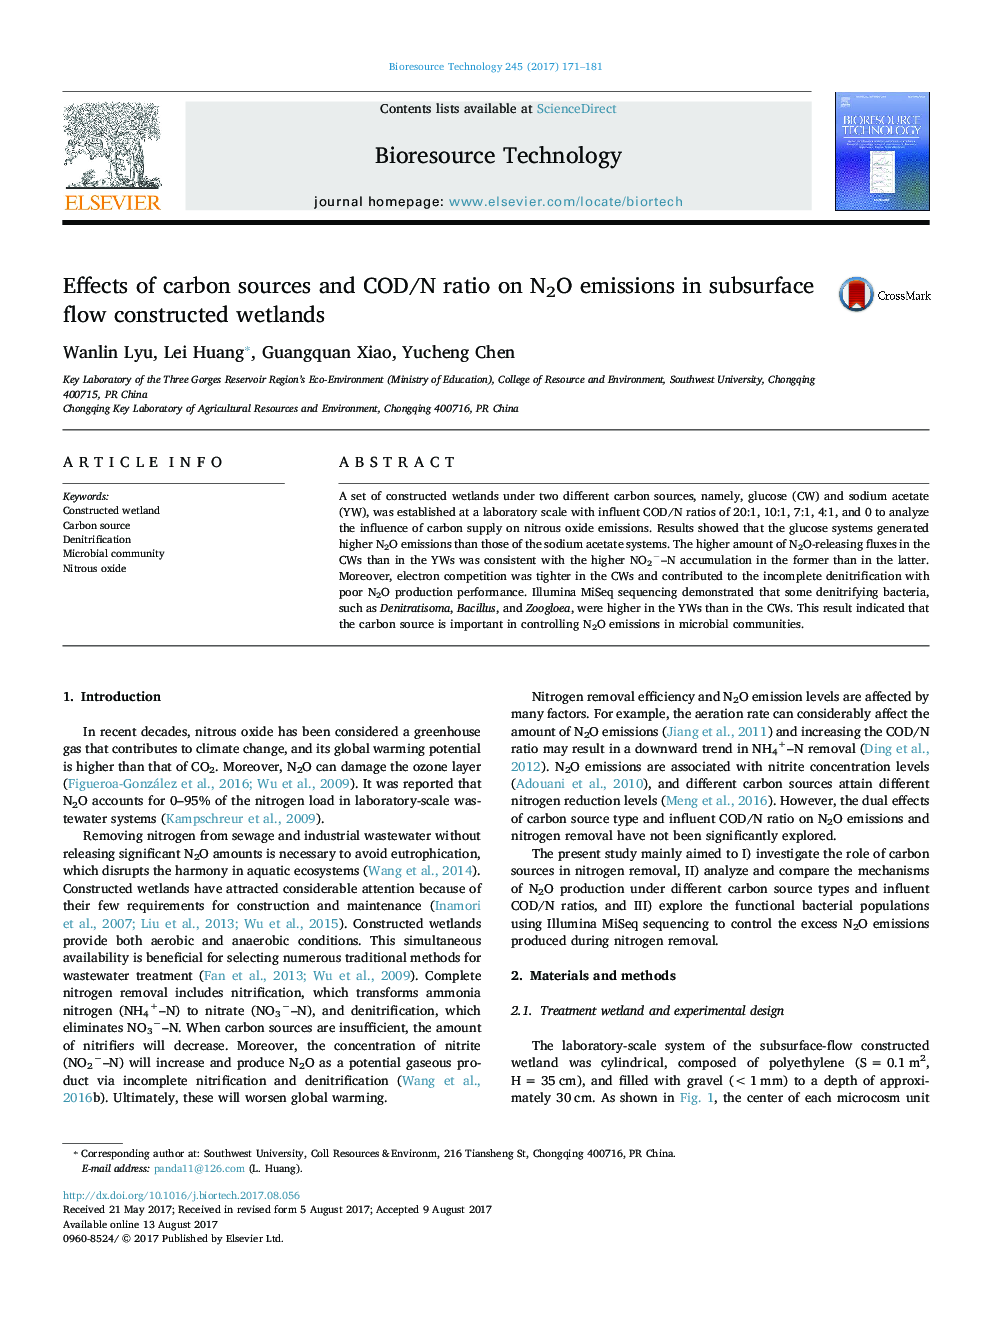 Effects of carbon sources and COD/N ratio on N2O emissions in subsurface flow constructed wetlands